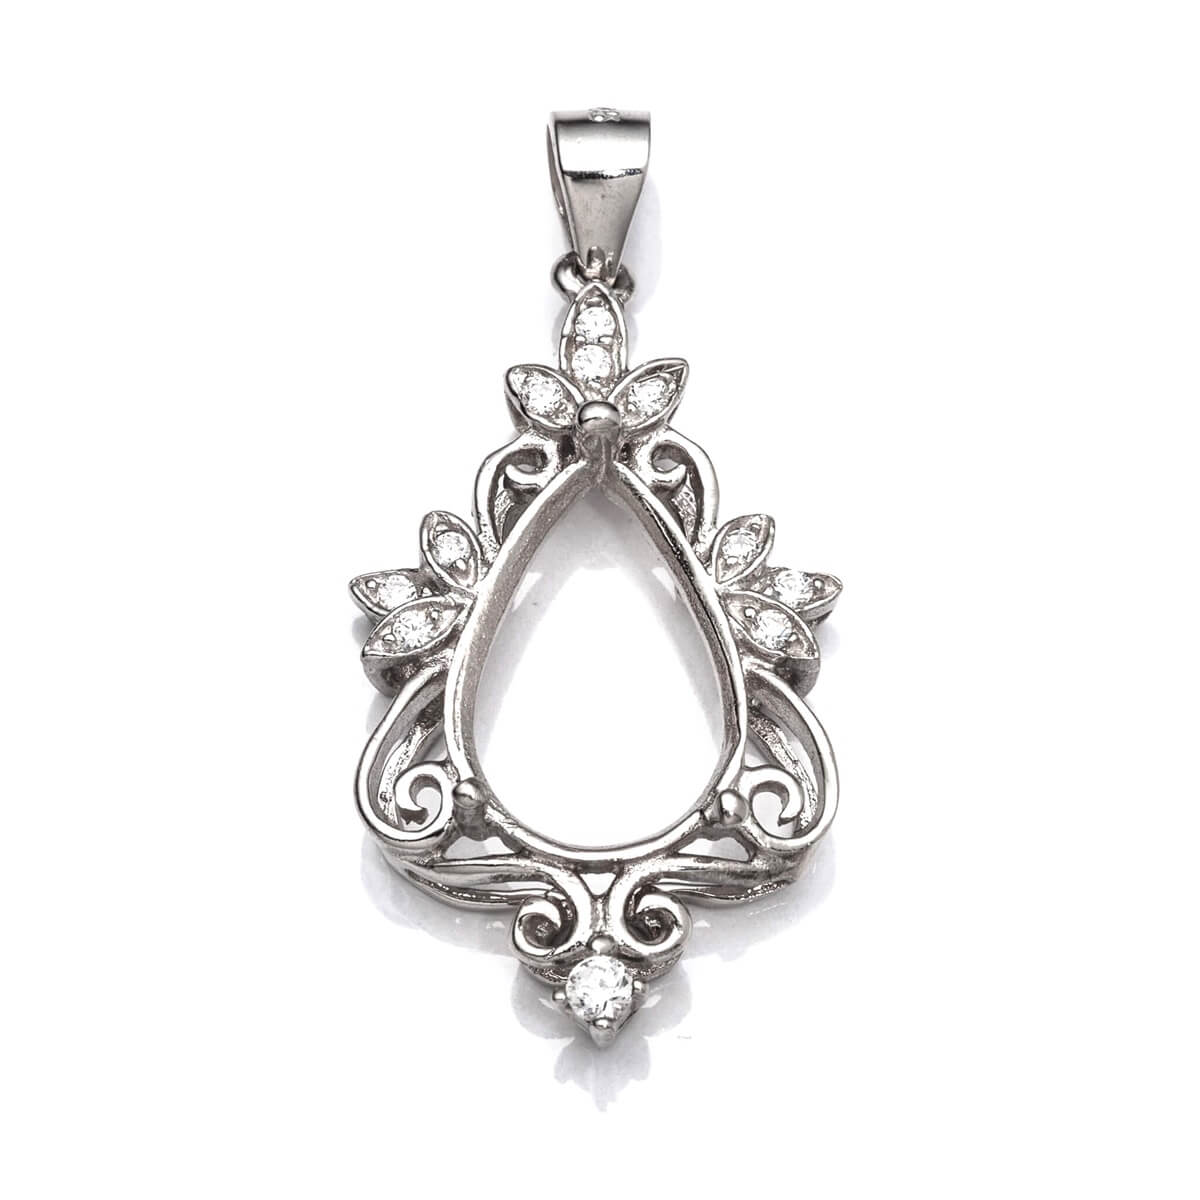 Pear Pendant with Cubic Zirconia Inlays and Pear Shape Mounting and Bail in Sterling Silver for 9x13mm pear stones 